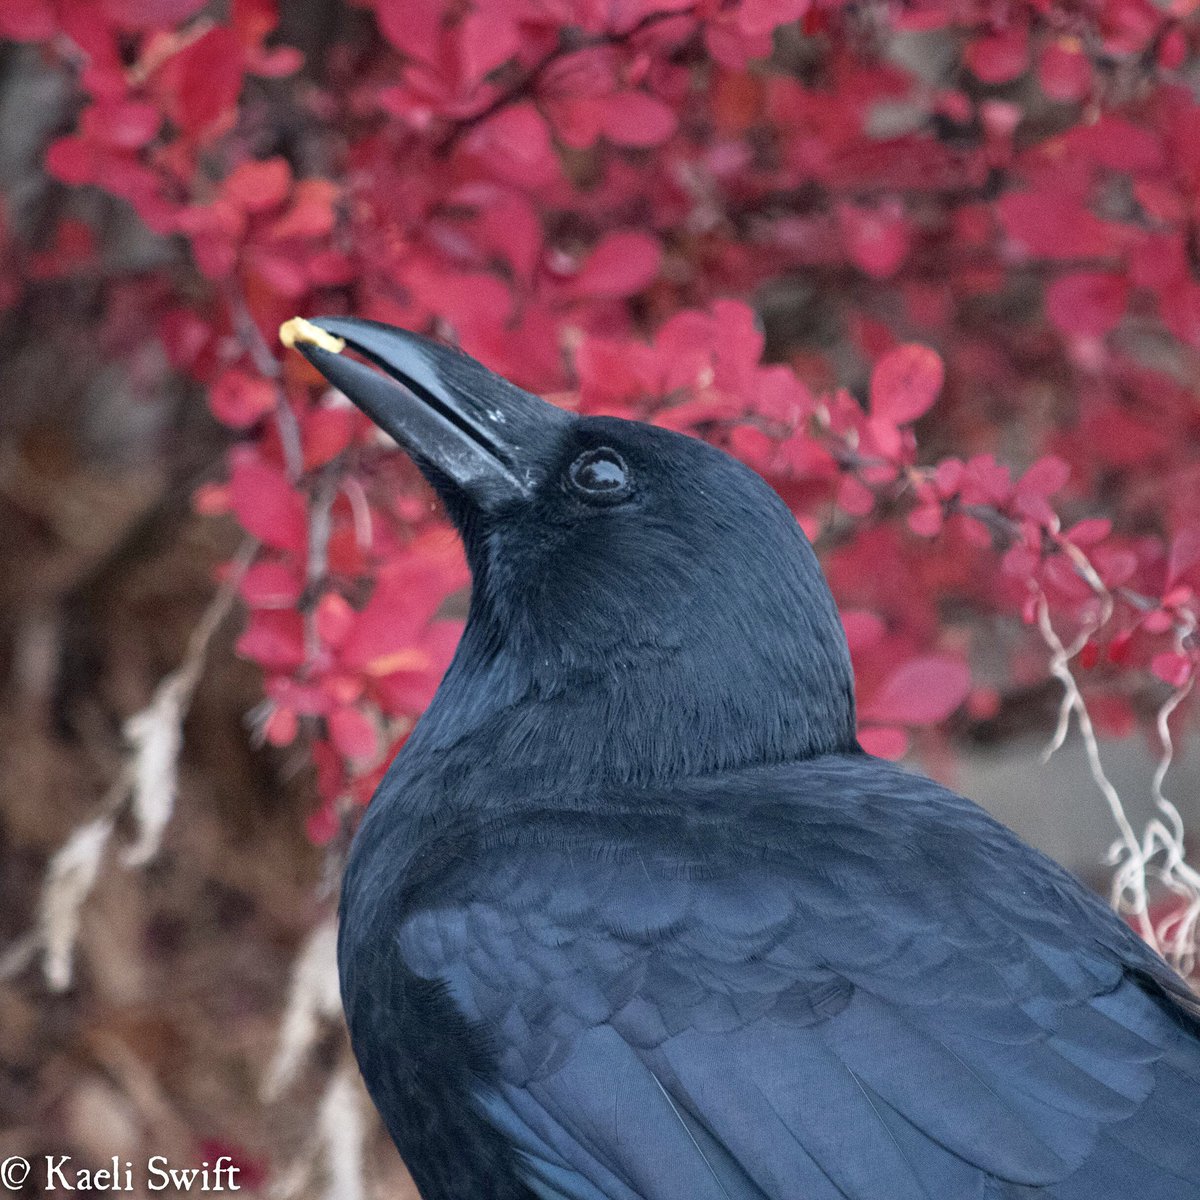 Do you ever feel like crows are so pretty you could cry? Or is that just me...